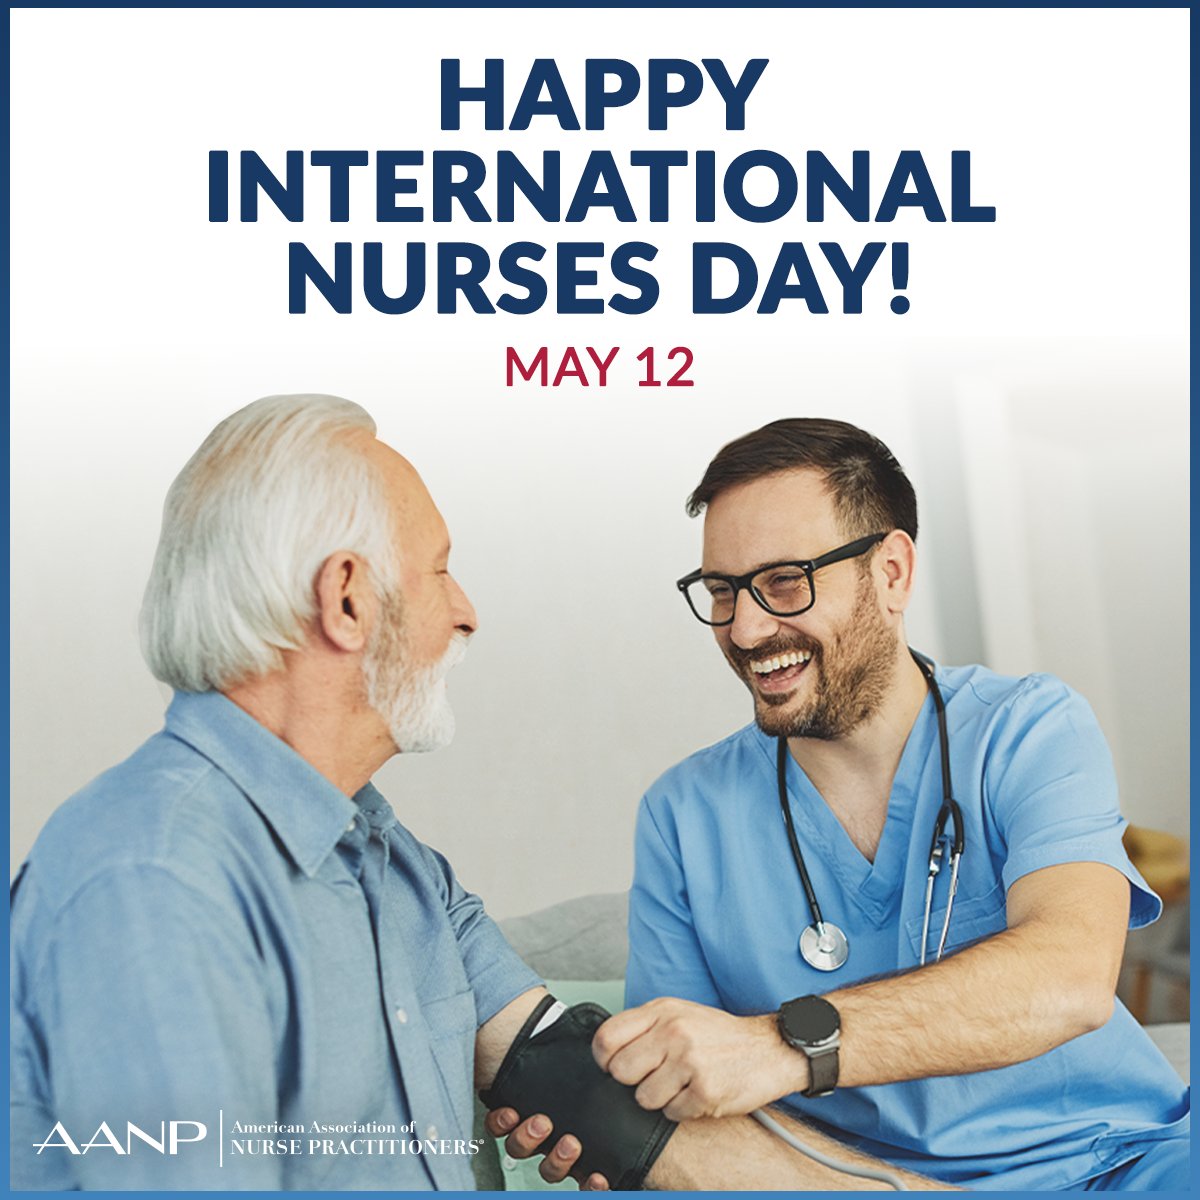 This International Nurses Day, AANP wants to thank all the APNs and NPs who work tirelessly to provide exceptional patient care across the globe. Feel empowered to make a measurable difference by becoming an international member of AANP today: bit.ly/aanp_intl. #NPsLead